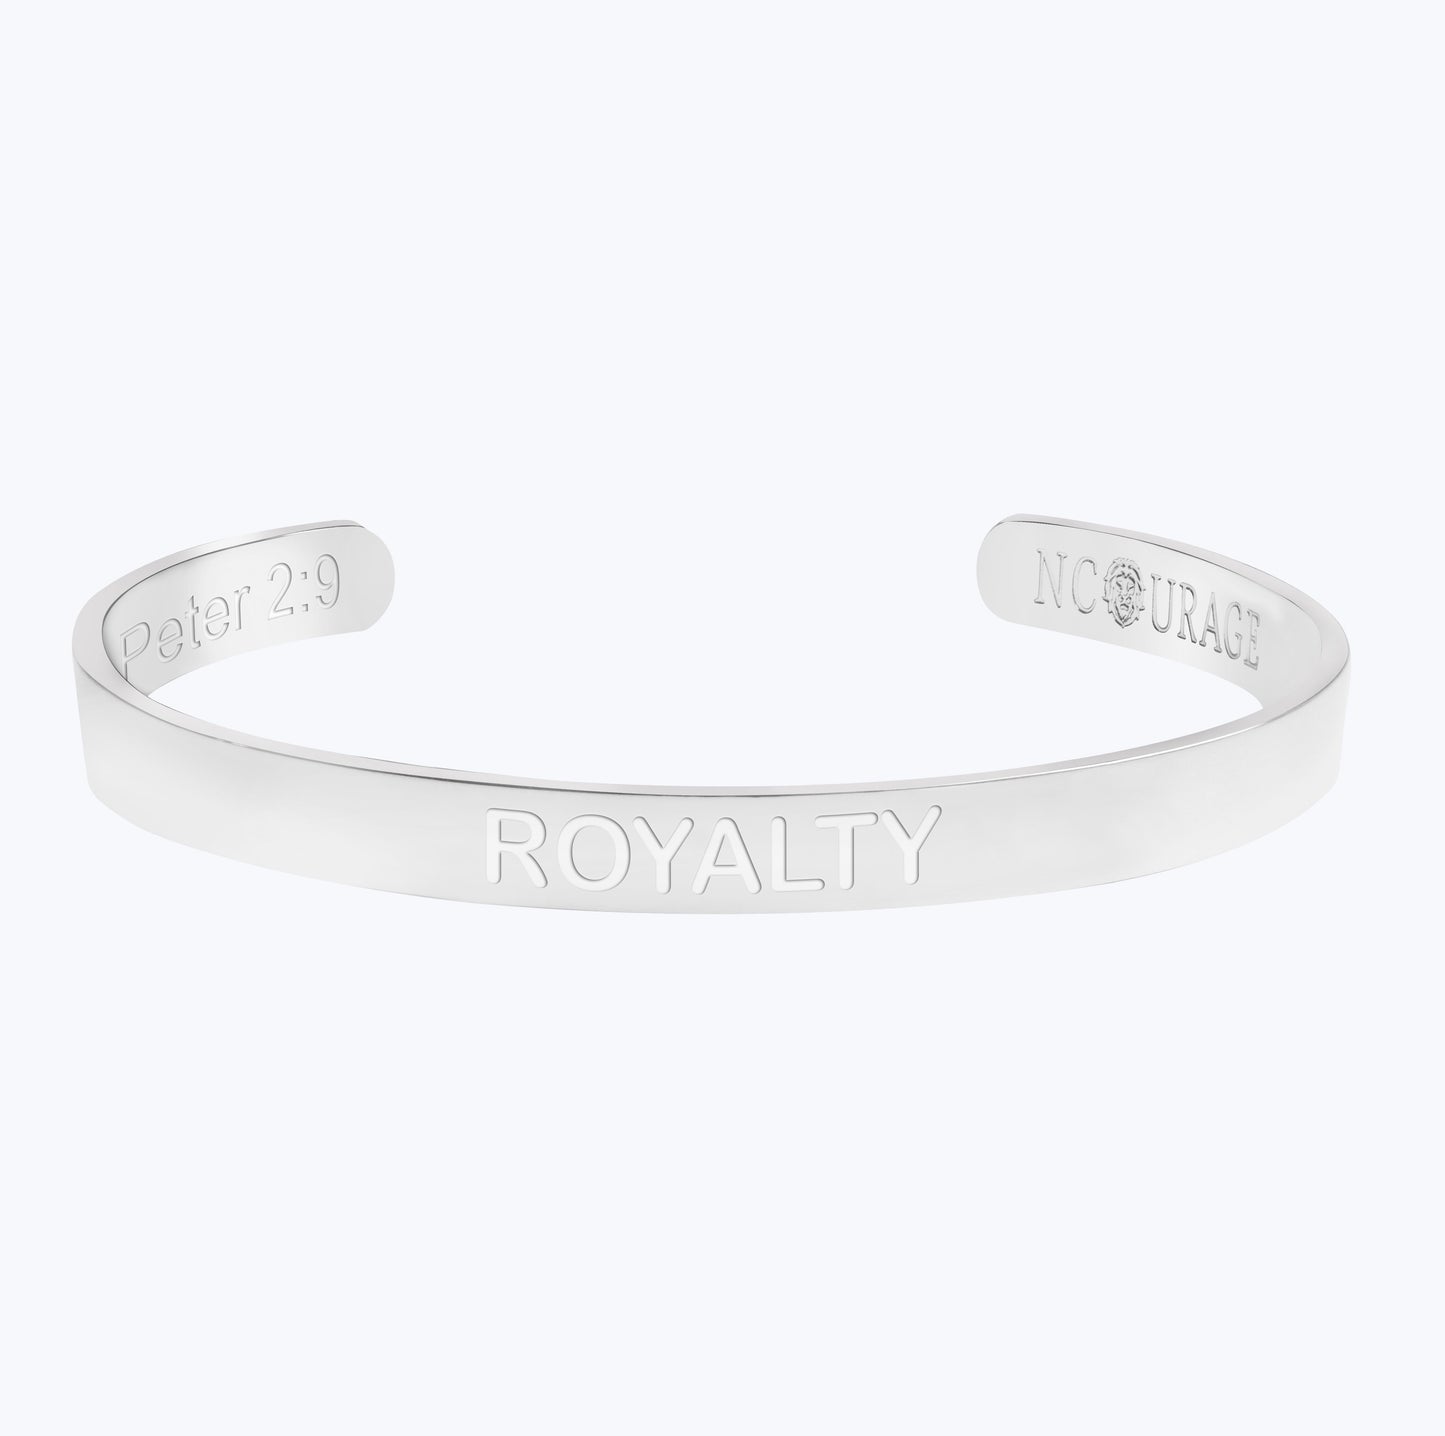 ROYALTY (7mm) - NCOURAGE Bands and Bracelets